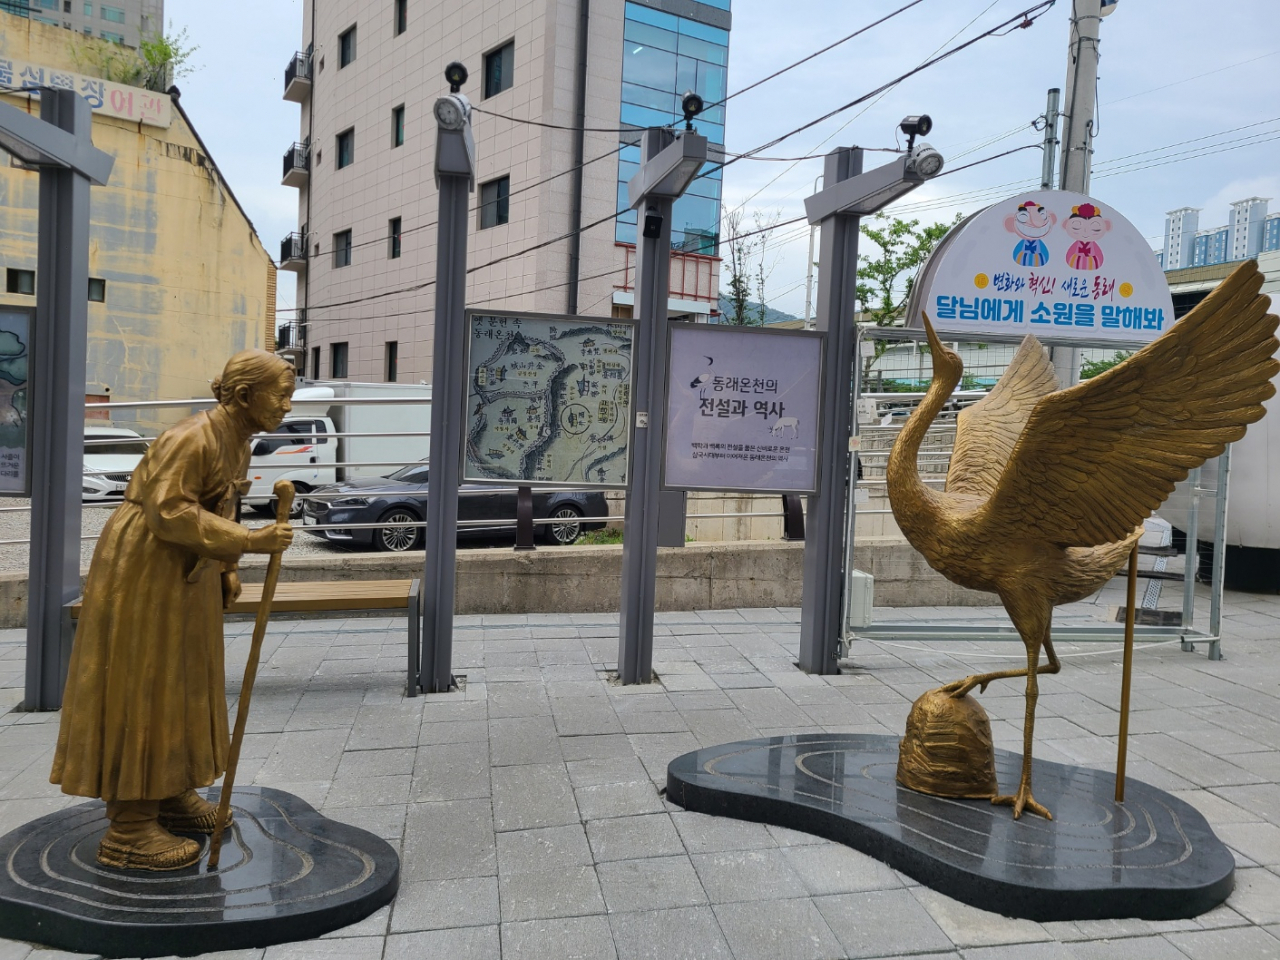 Statues of an old lady and a crane from the legend of the Dongnae hot springs (Jung Min-kyung/ The Korea Herald)